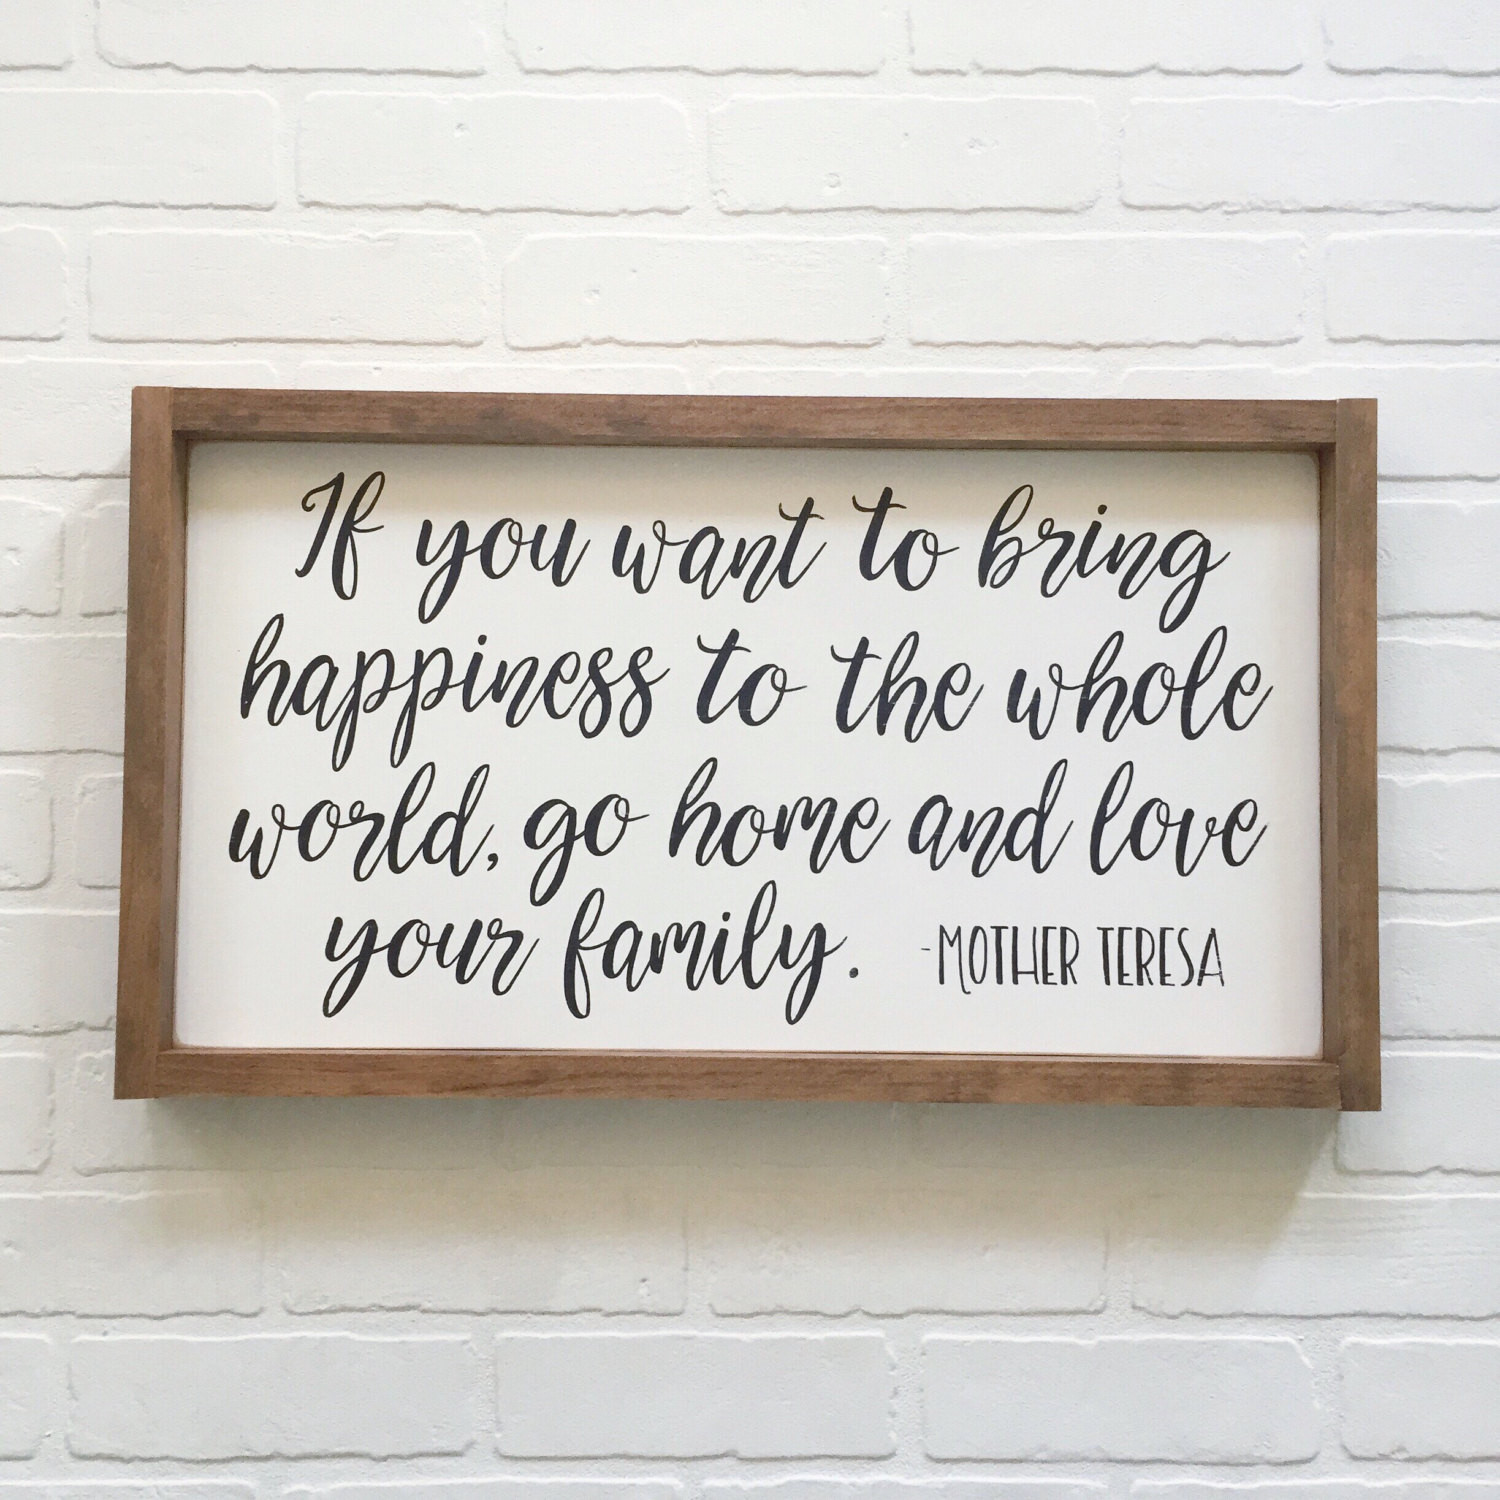 Mother Teresa Quotes On Family
 13x24 Mother Teresa quote wood sign family by